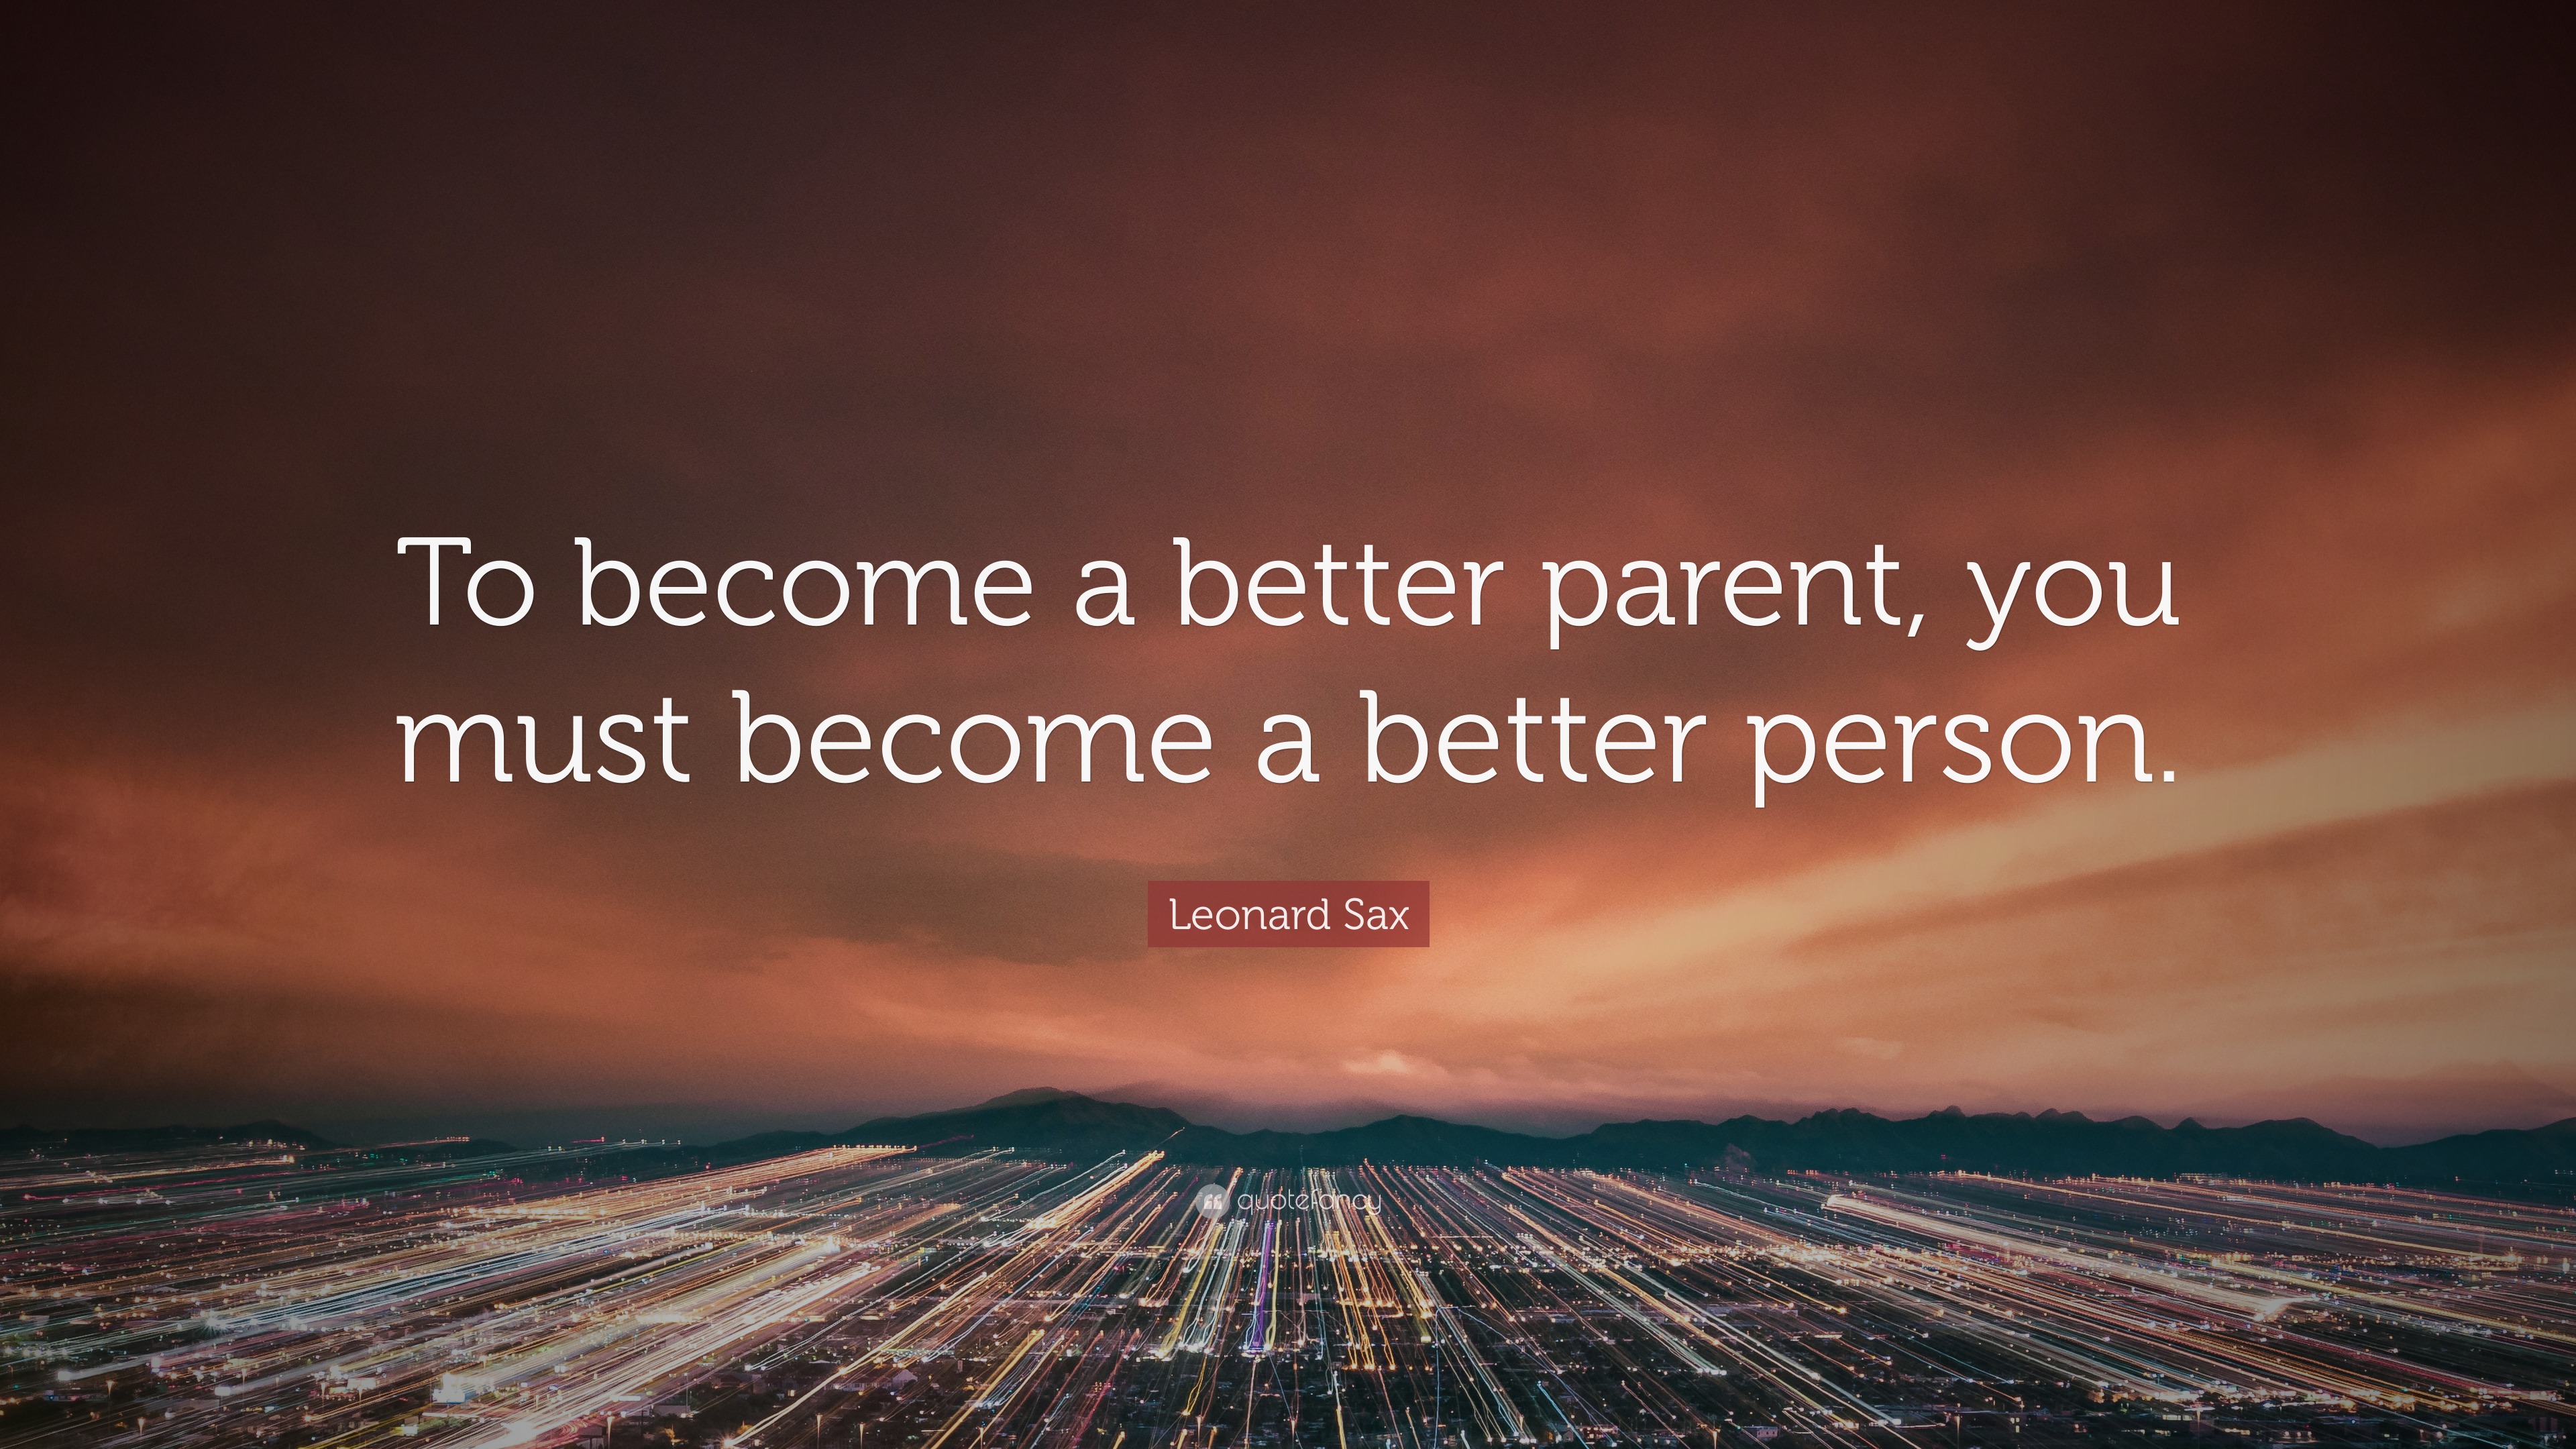 25 'Be Better' Quotes On How To Be A Better Person